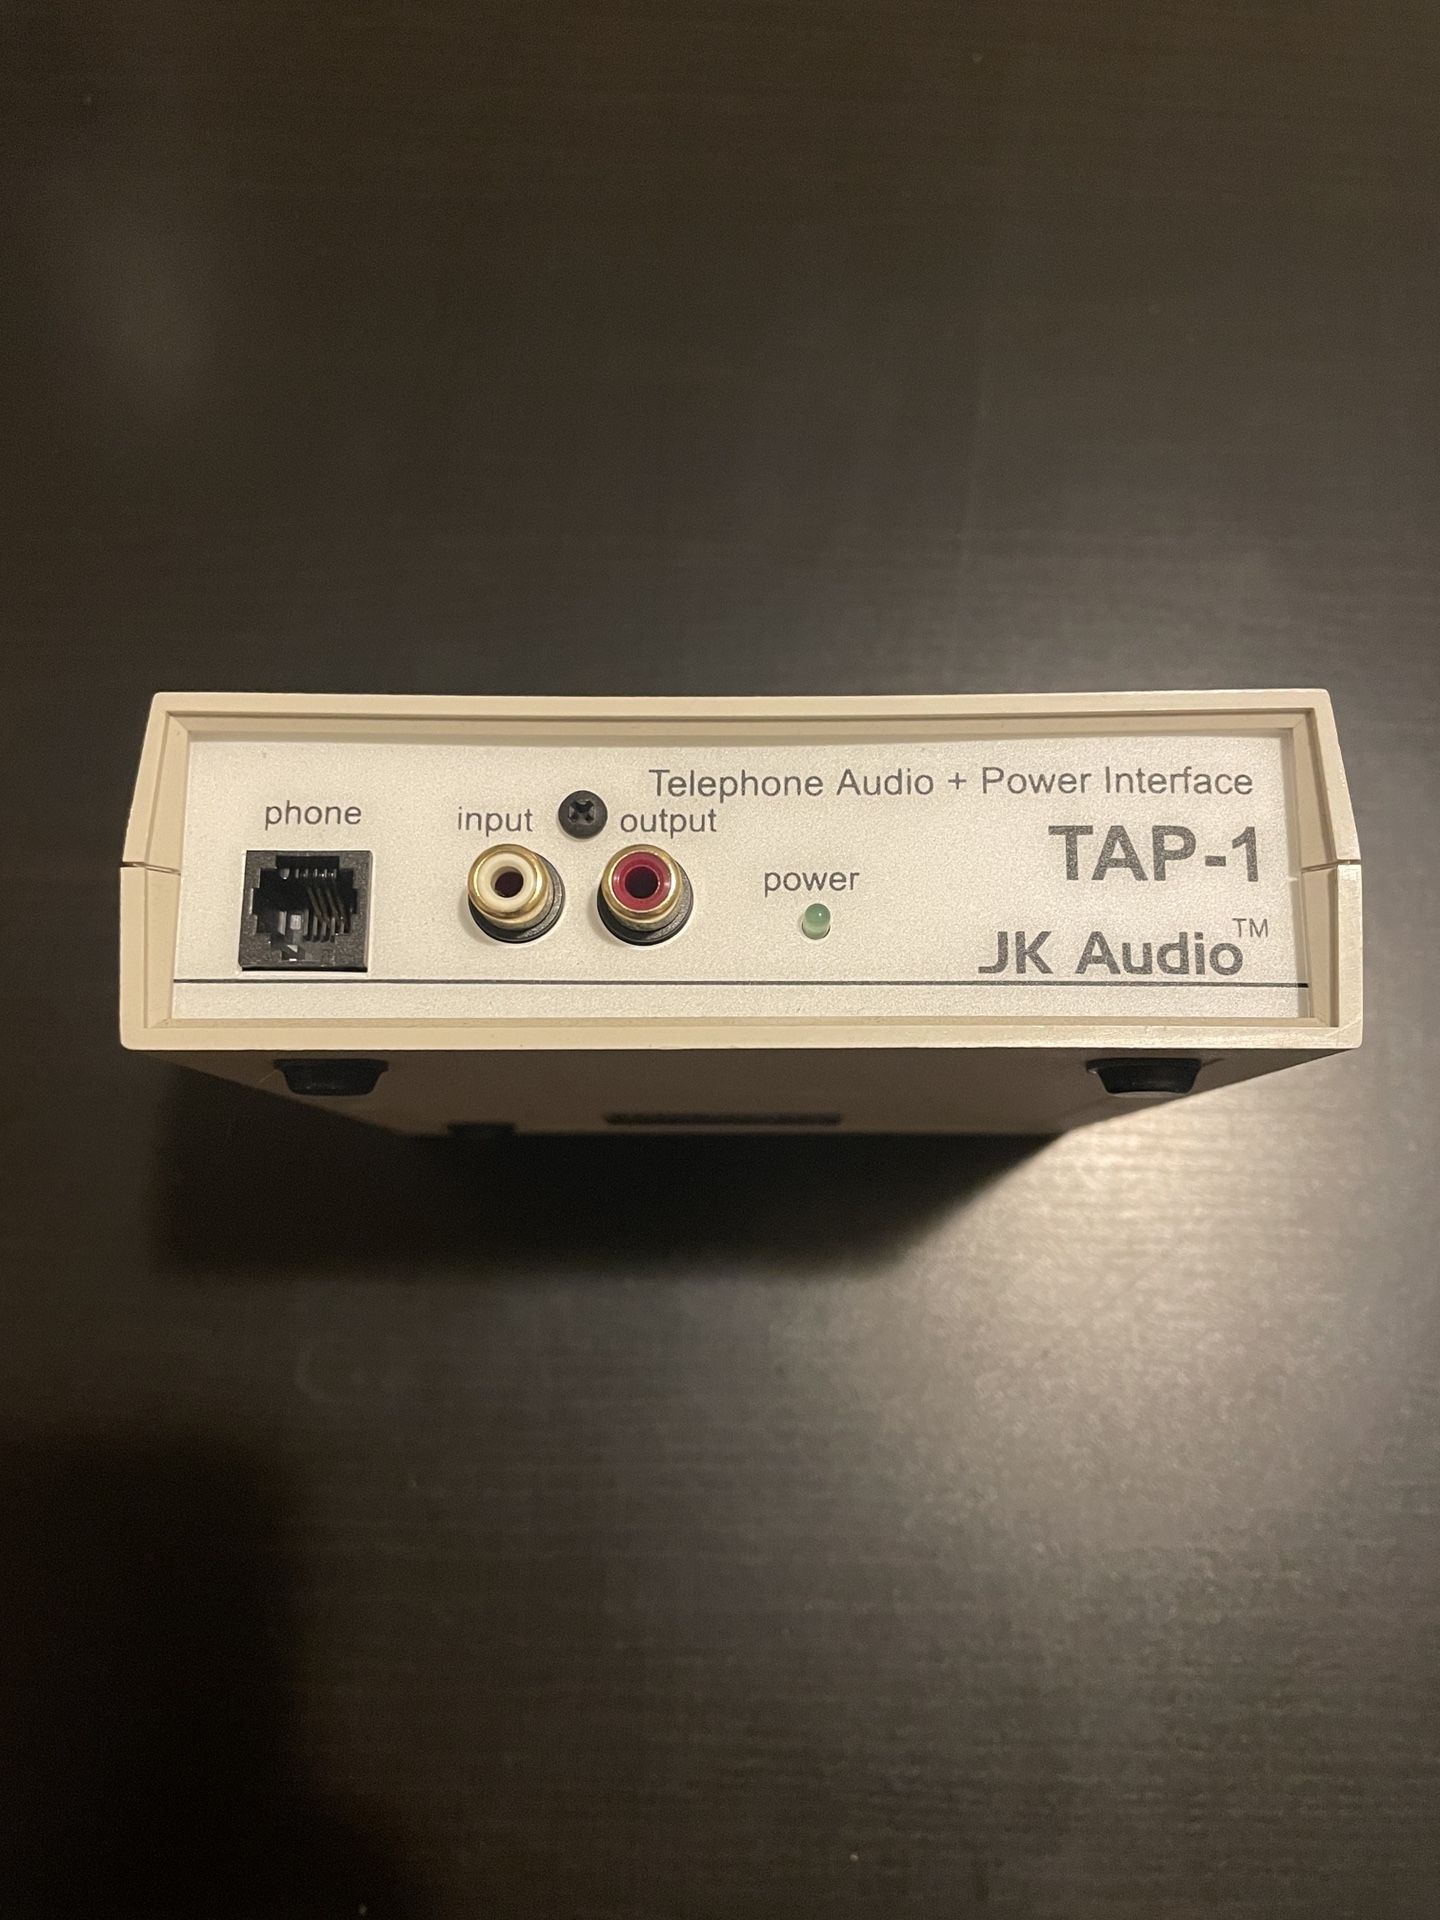 JK Audio Model TAP-1 Telephone Audio and Power Interface